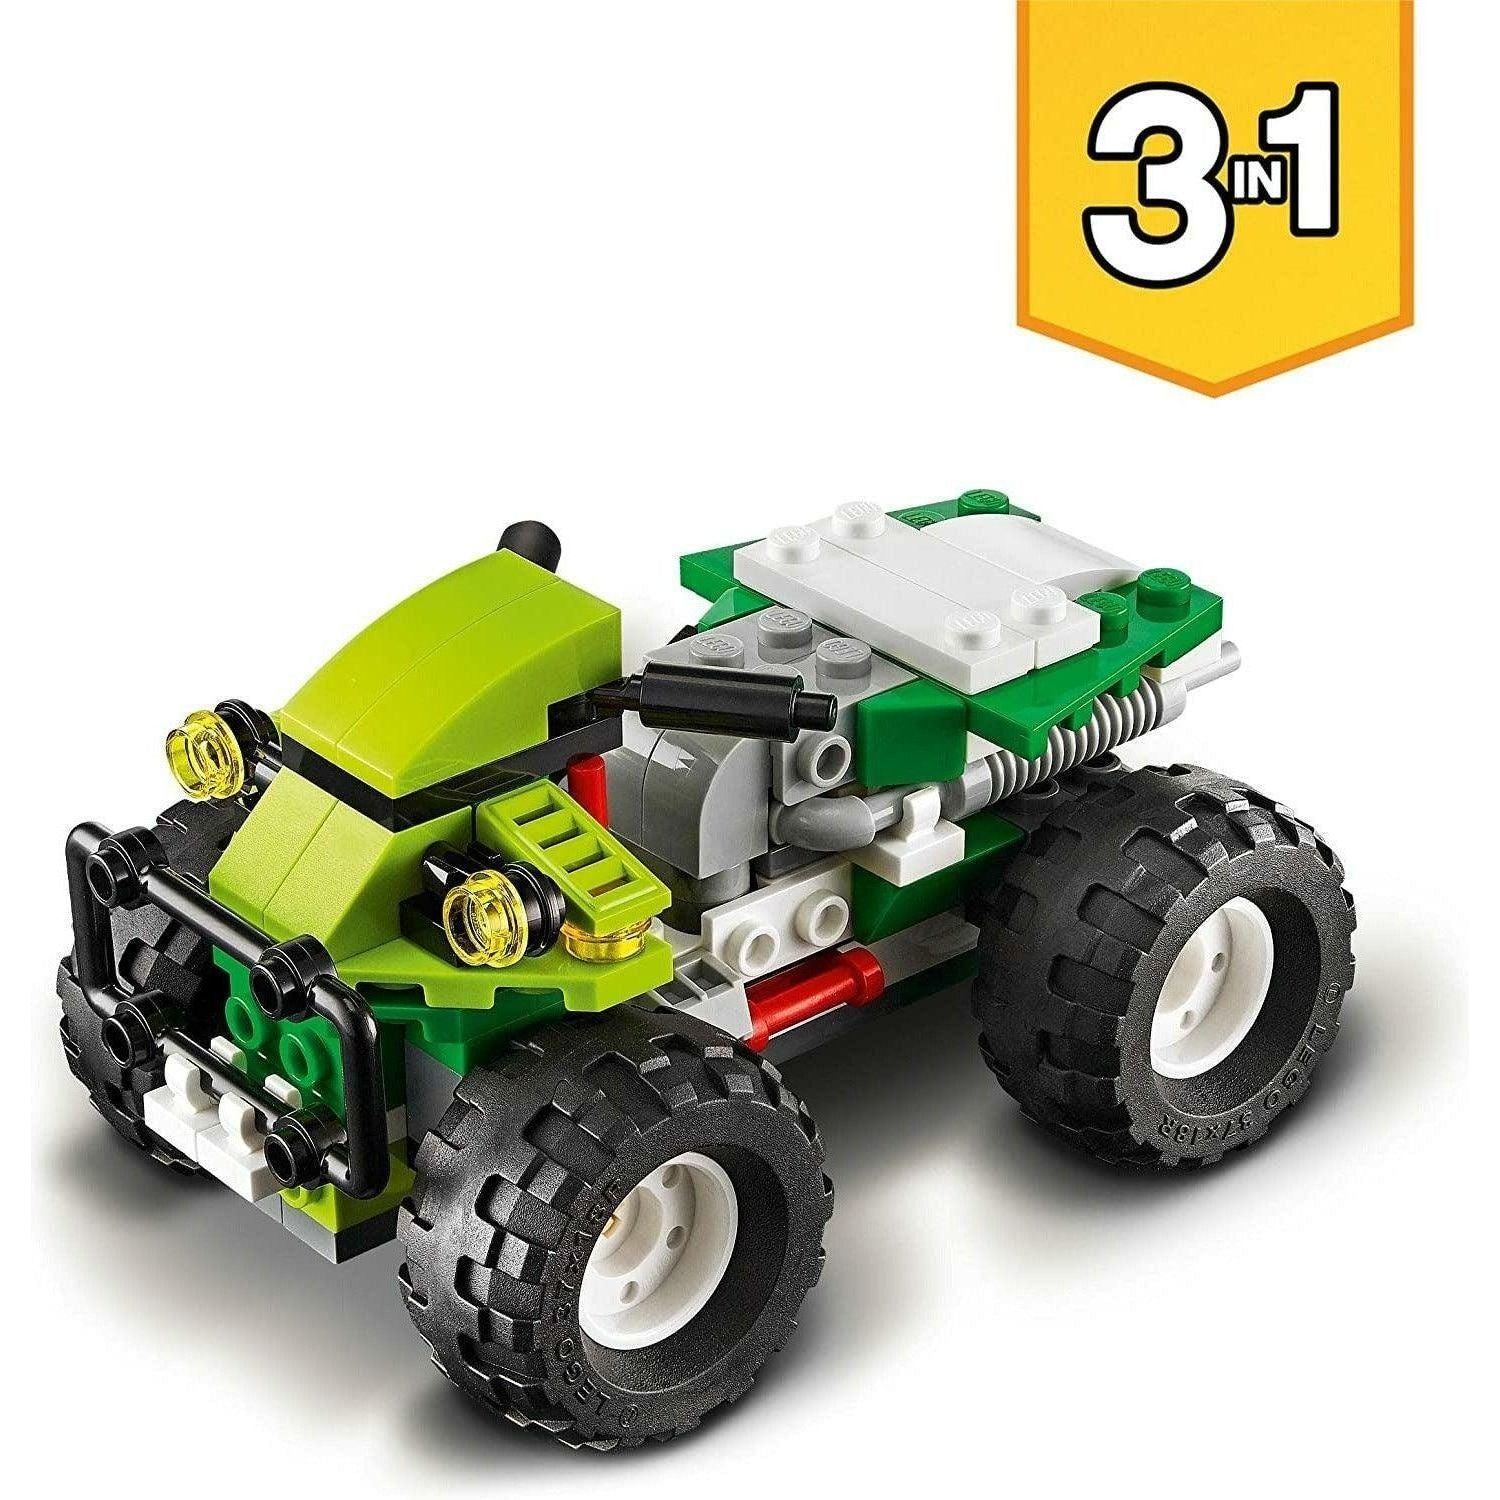 LEGO 31123 Creator 3in1 Off-road Buggy to Skid Loader Digger to ATV Car Toy 160 Pieces - BumbleToys - 8-13 Years, Boys, Creator 3In1, LEGO, OXE, Pre-Order